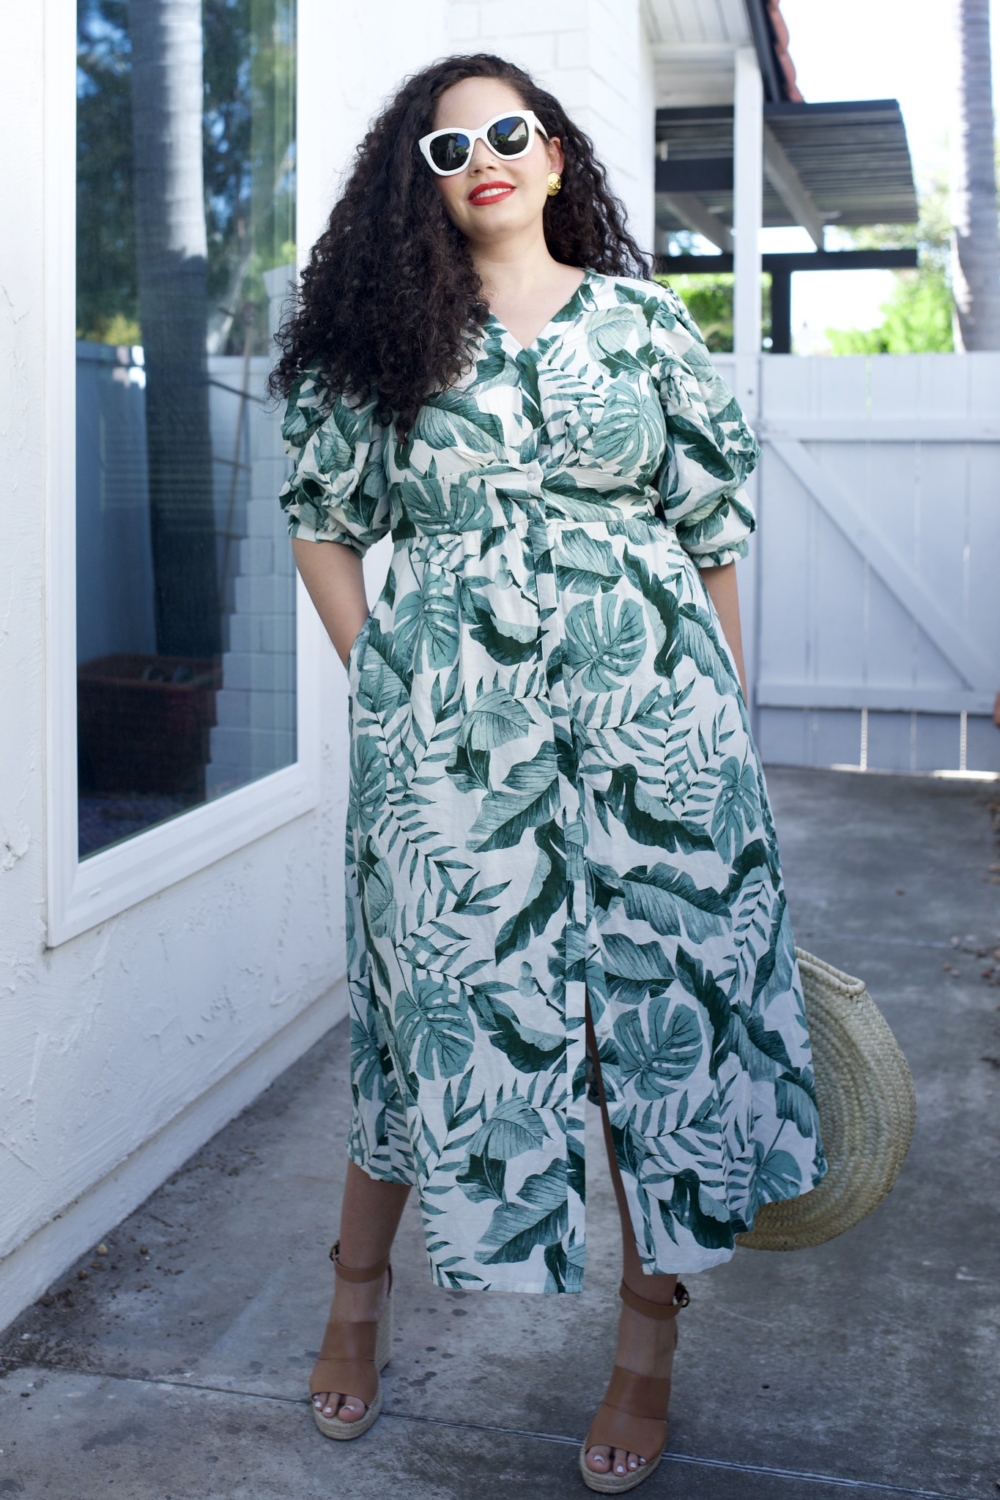 Bored of Florals? Try Leaf Prints Instead | Girl With Curves